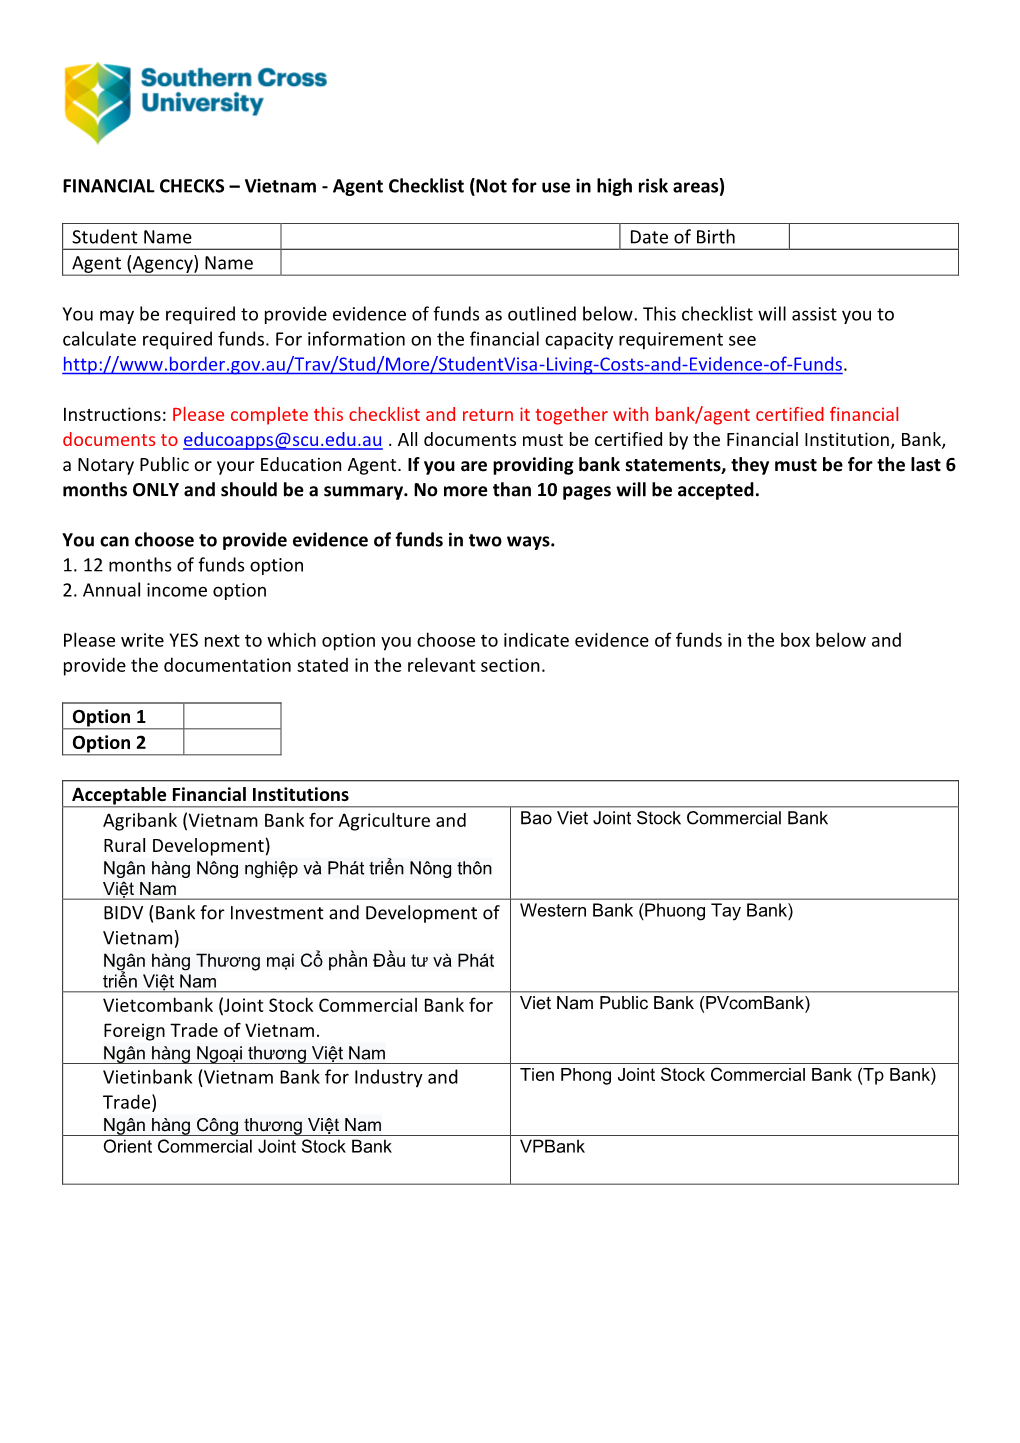 FINANCIAL CHECKS – Vietnam - Agent Checklist (Not for Use in High Risk Areas)